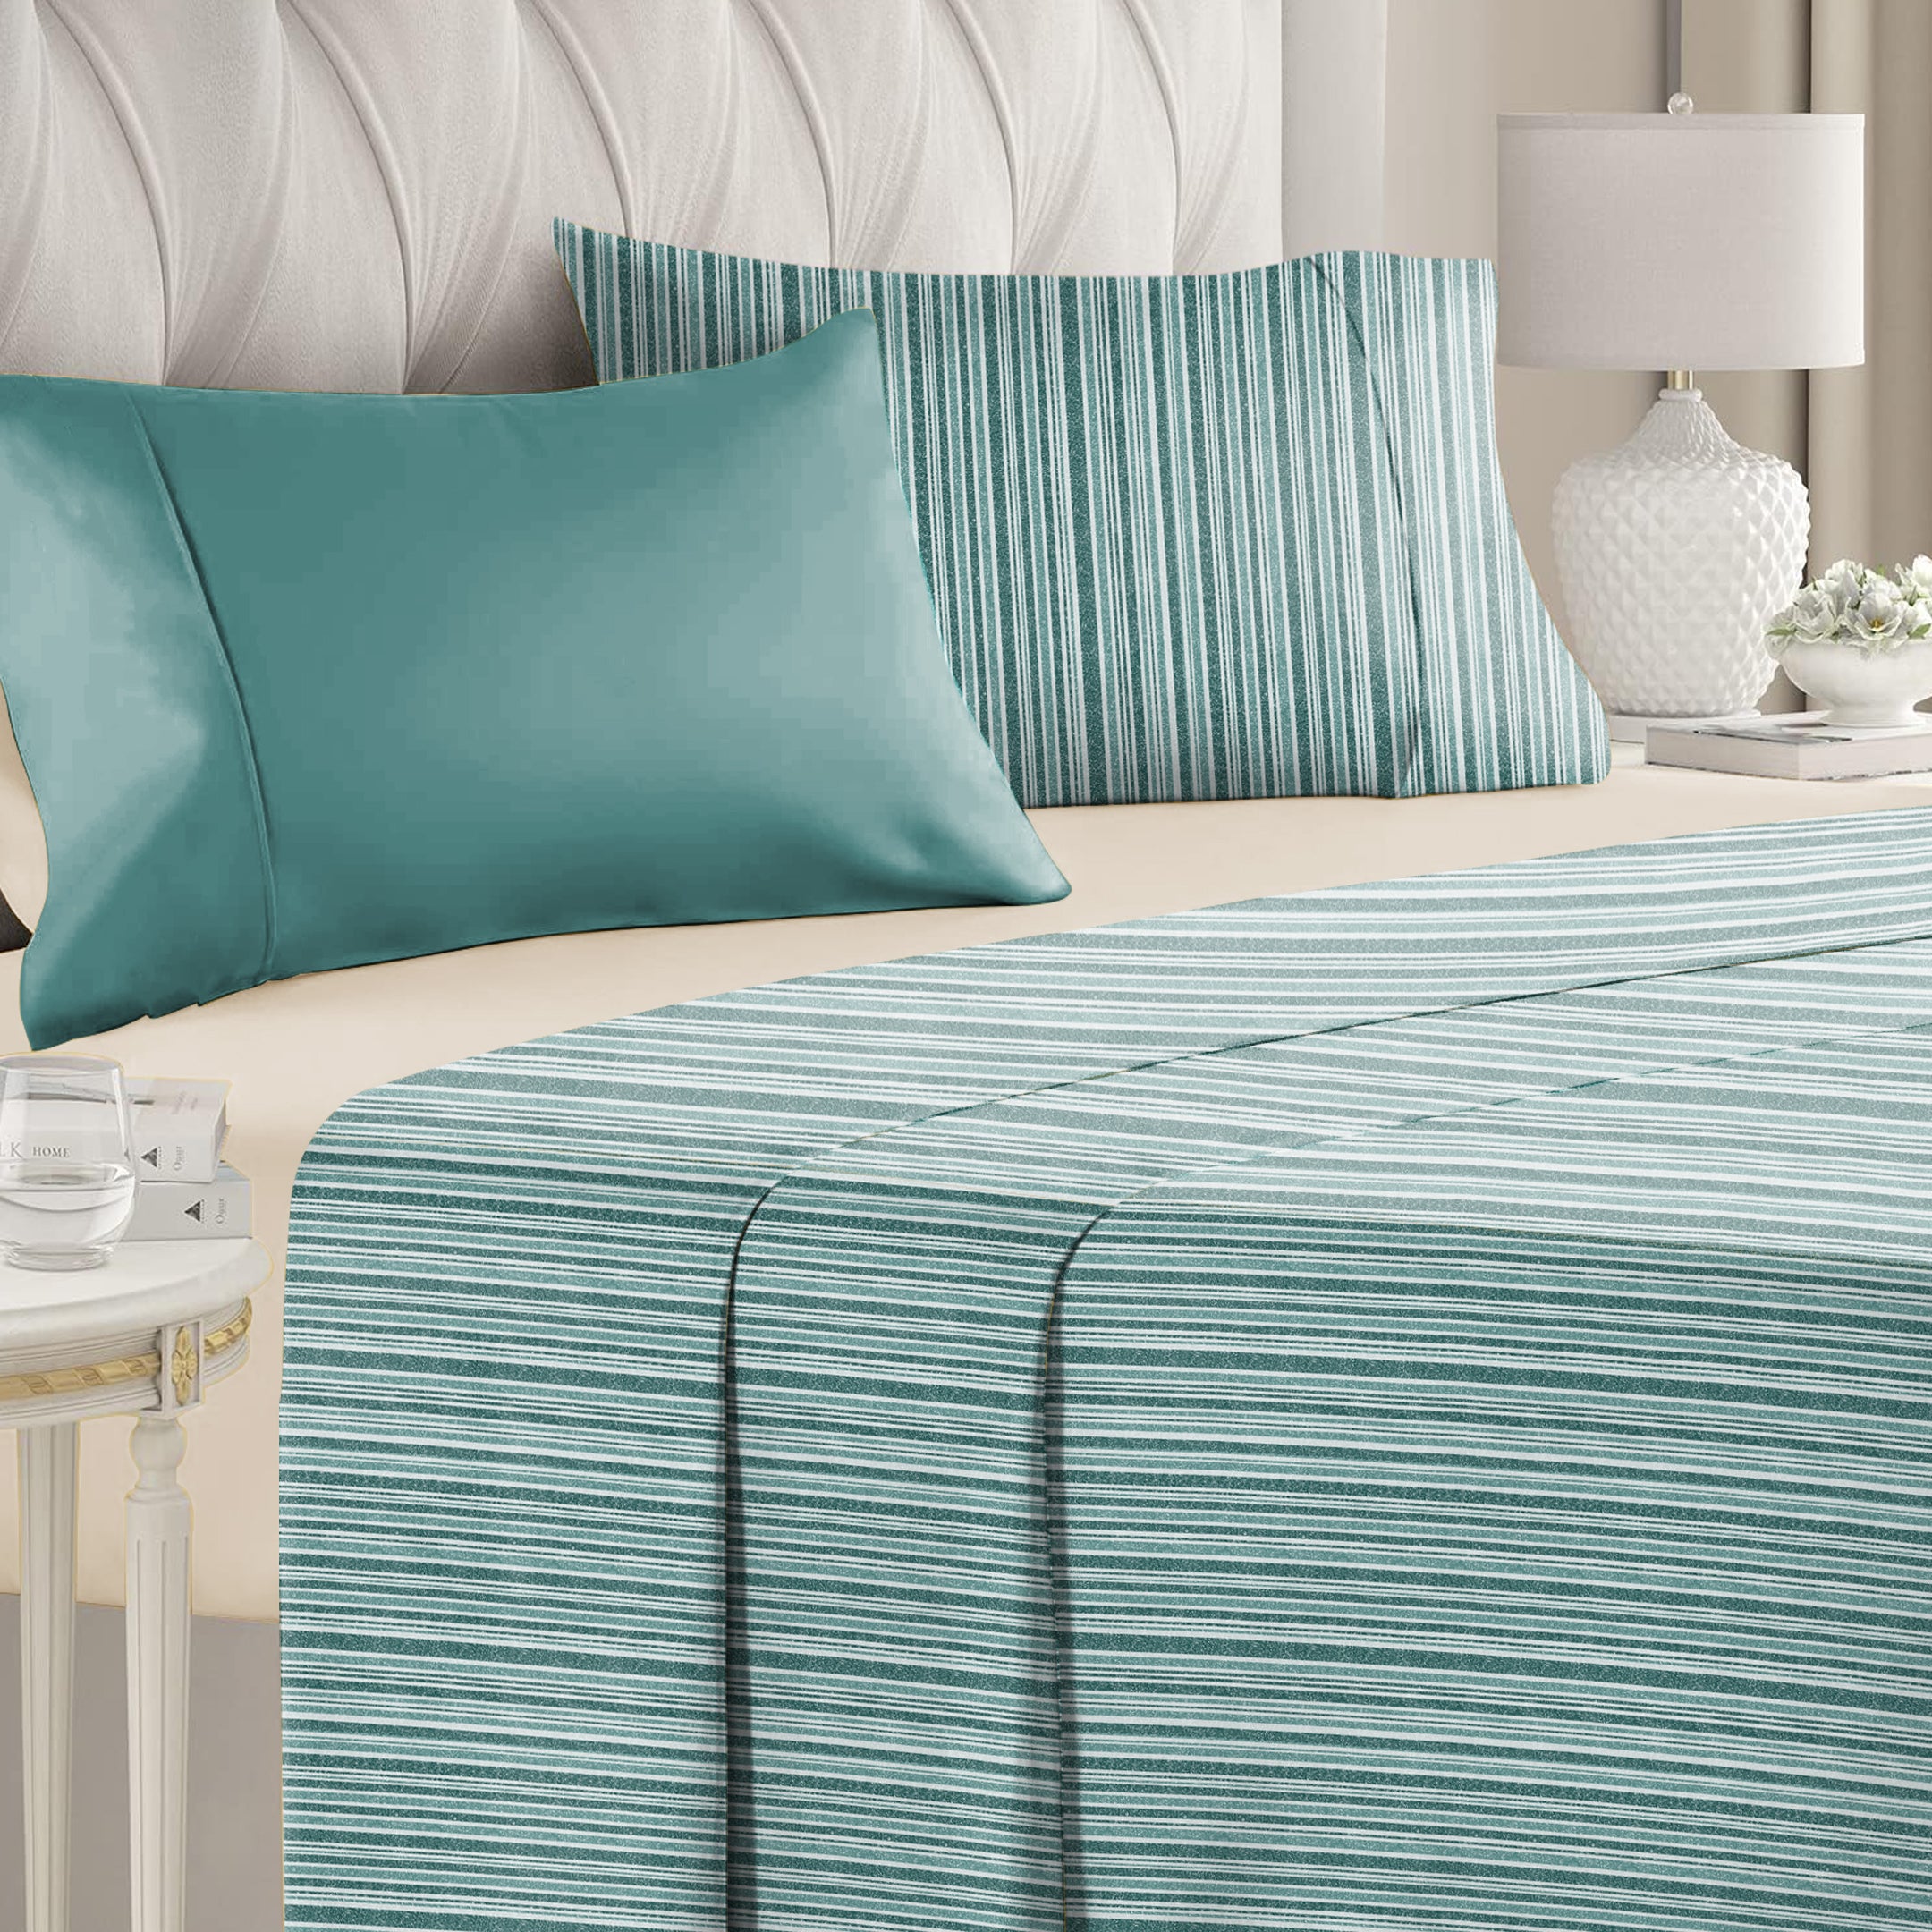 Jodhpur Stripe Bedsheet for Double Bed with 2 PillowCovers King Size (104" X 90") Teal